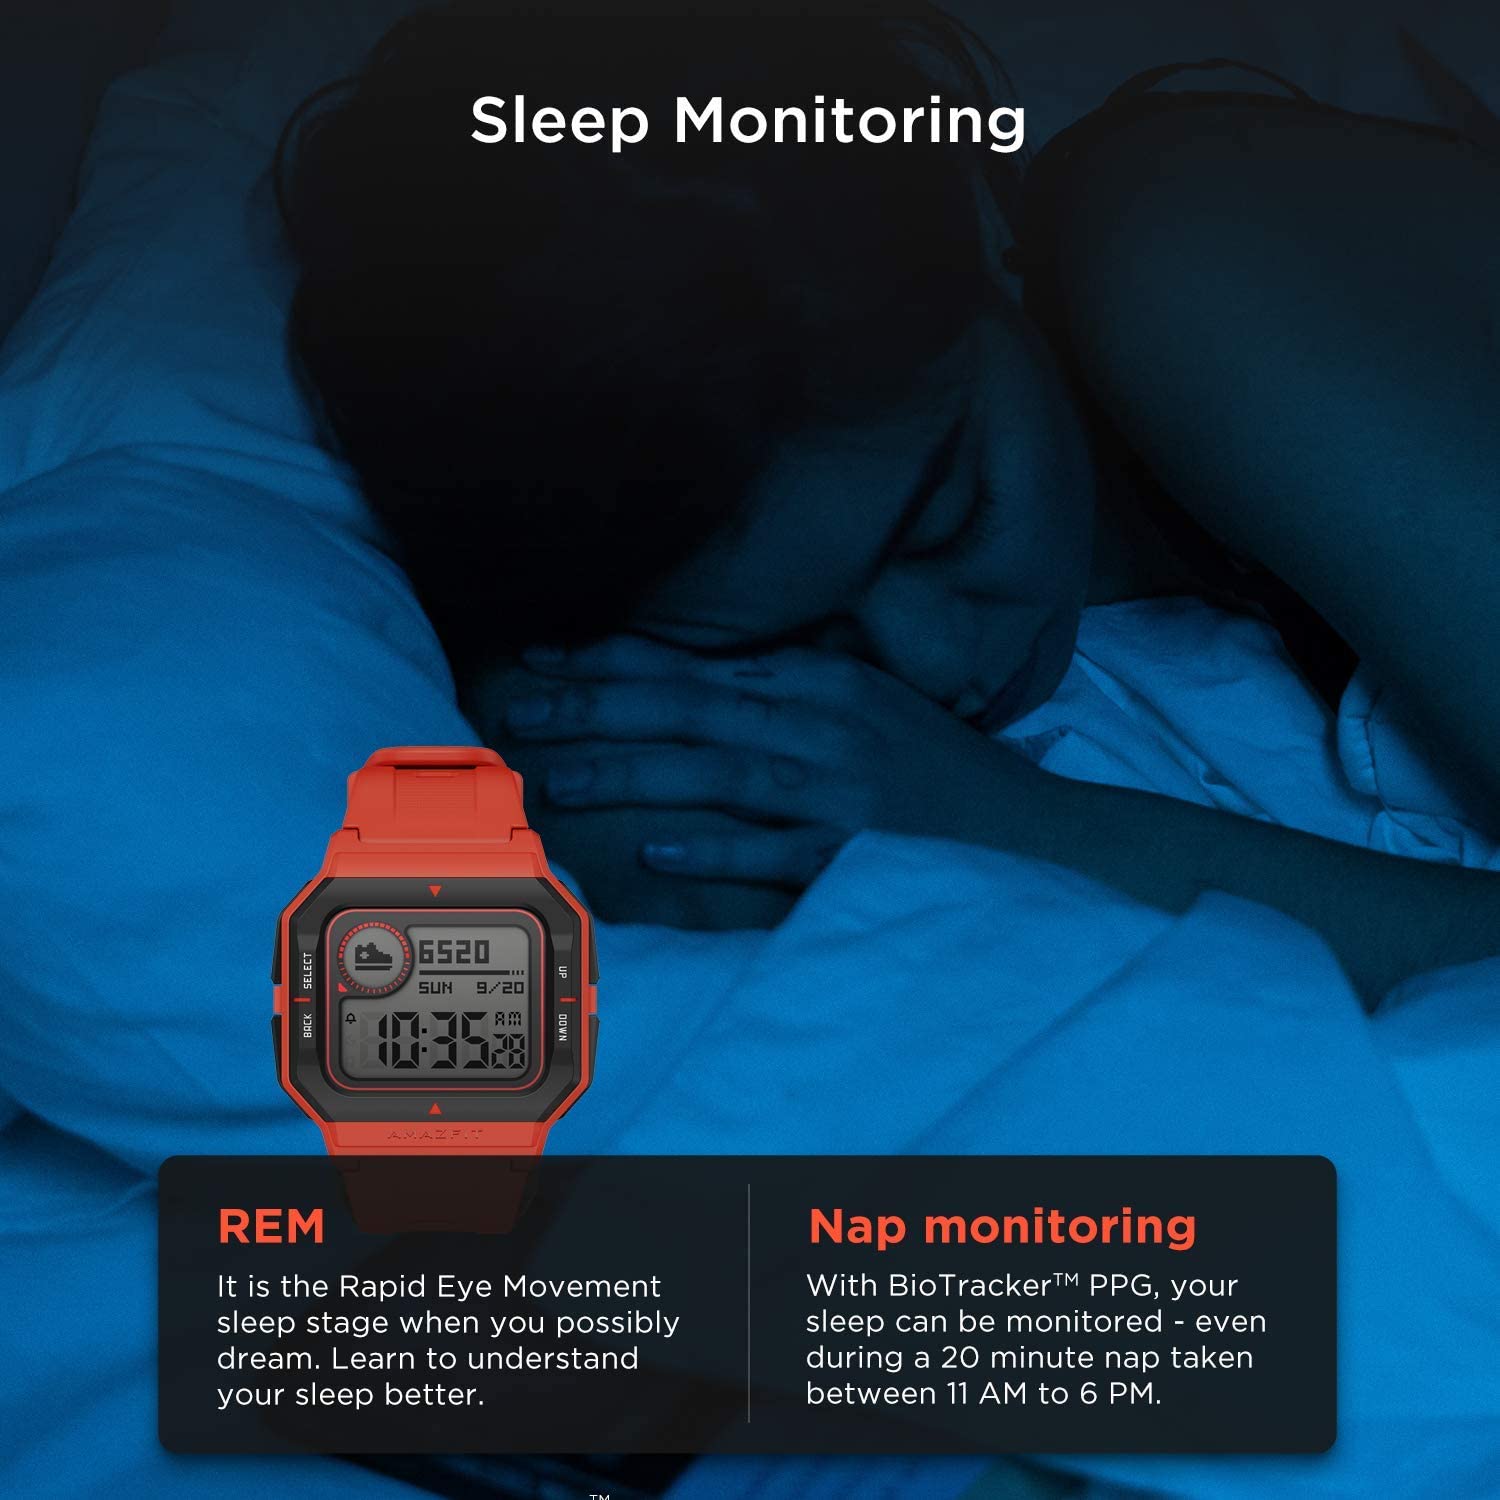 Amazfit Neo Fitness Retro Smartwatch with Real-Time Workout Tracking, Heart Rate and Sleep Monitoring, 28-Day Battery Life, Smart Notifications, 1.2" Always-On Display, Water Resistant, Red